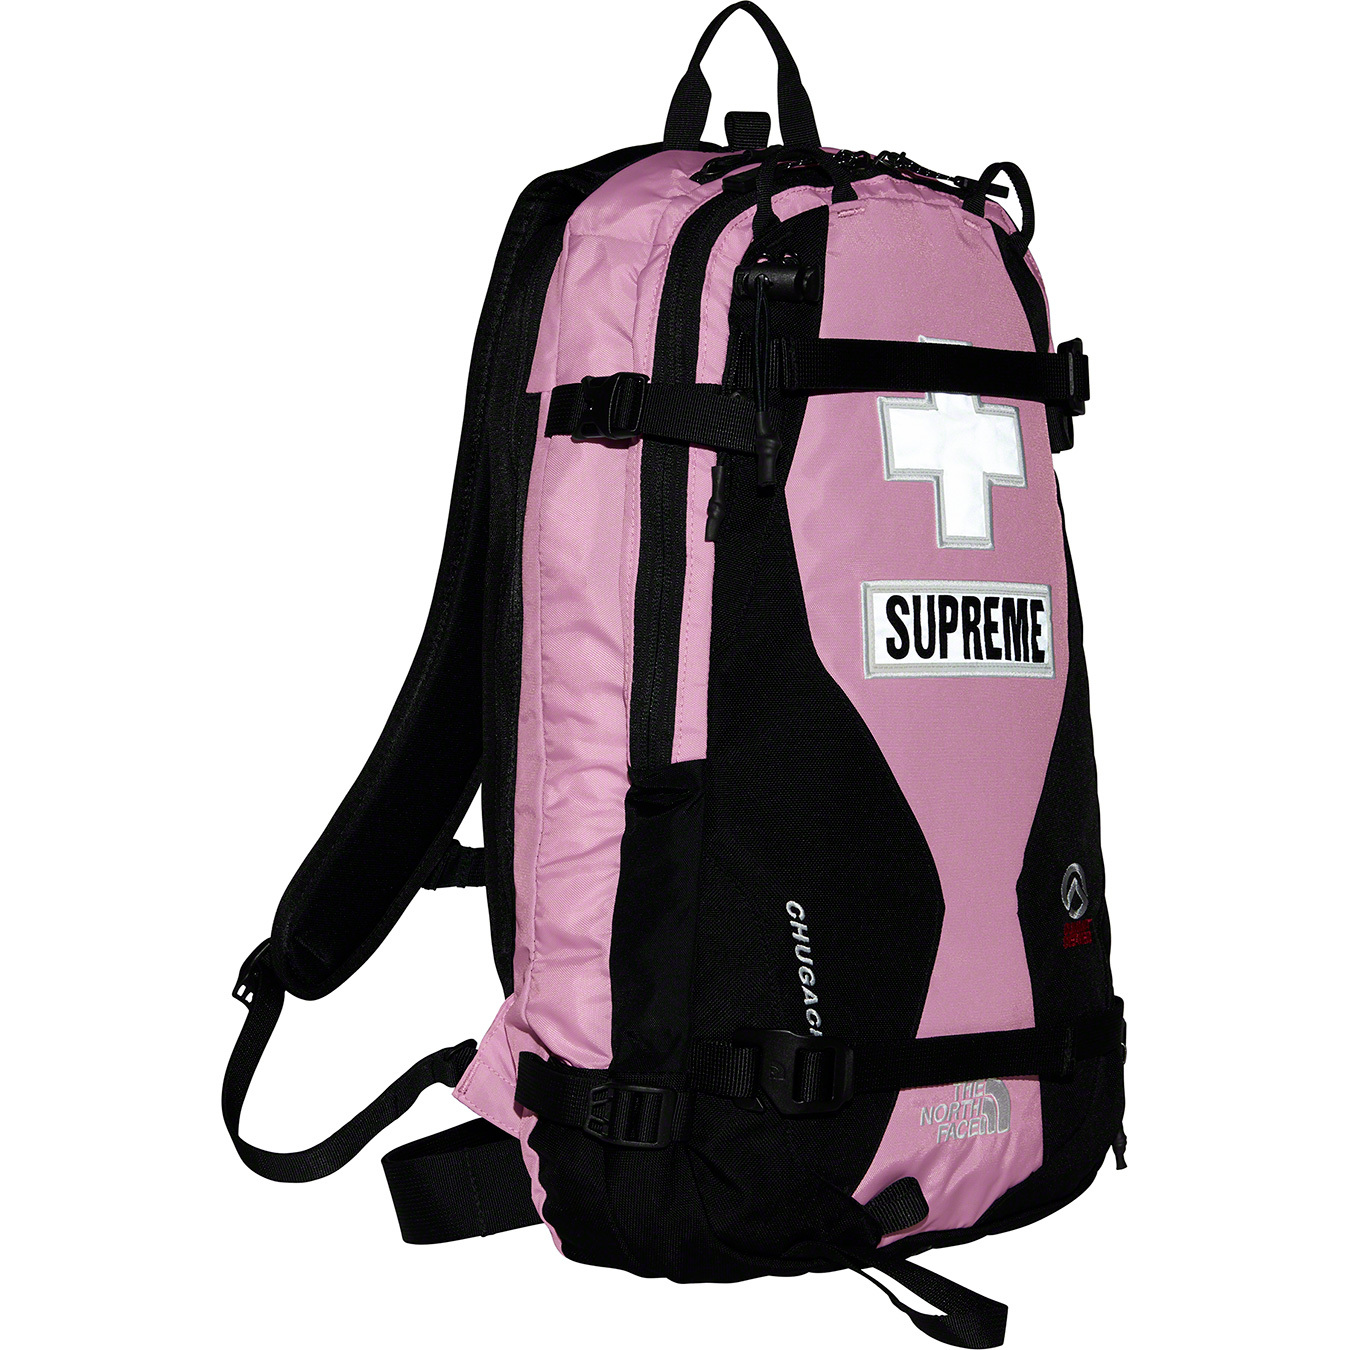 Supreme®/The North Face® Summit Series Rescue Chugach 16 Backpack